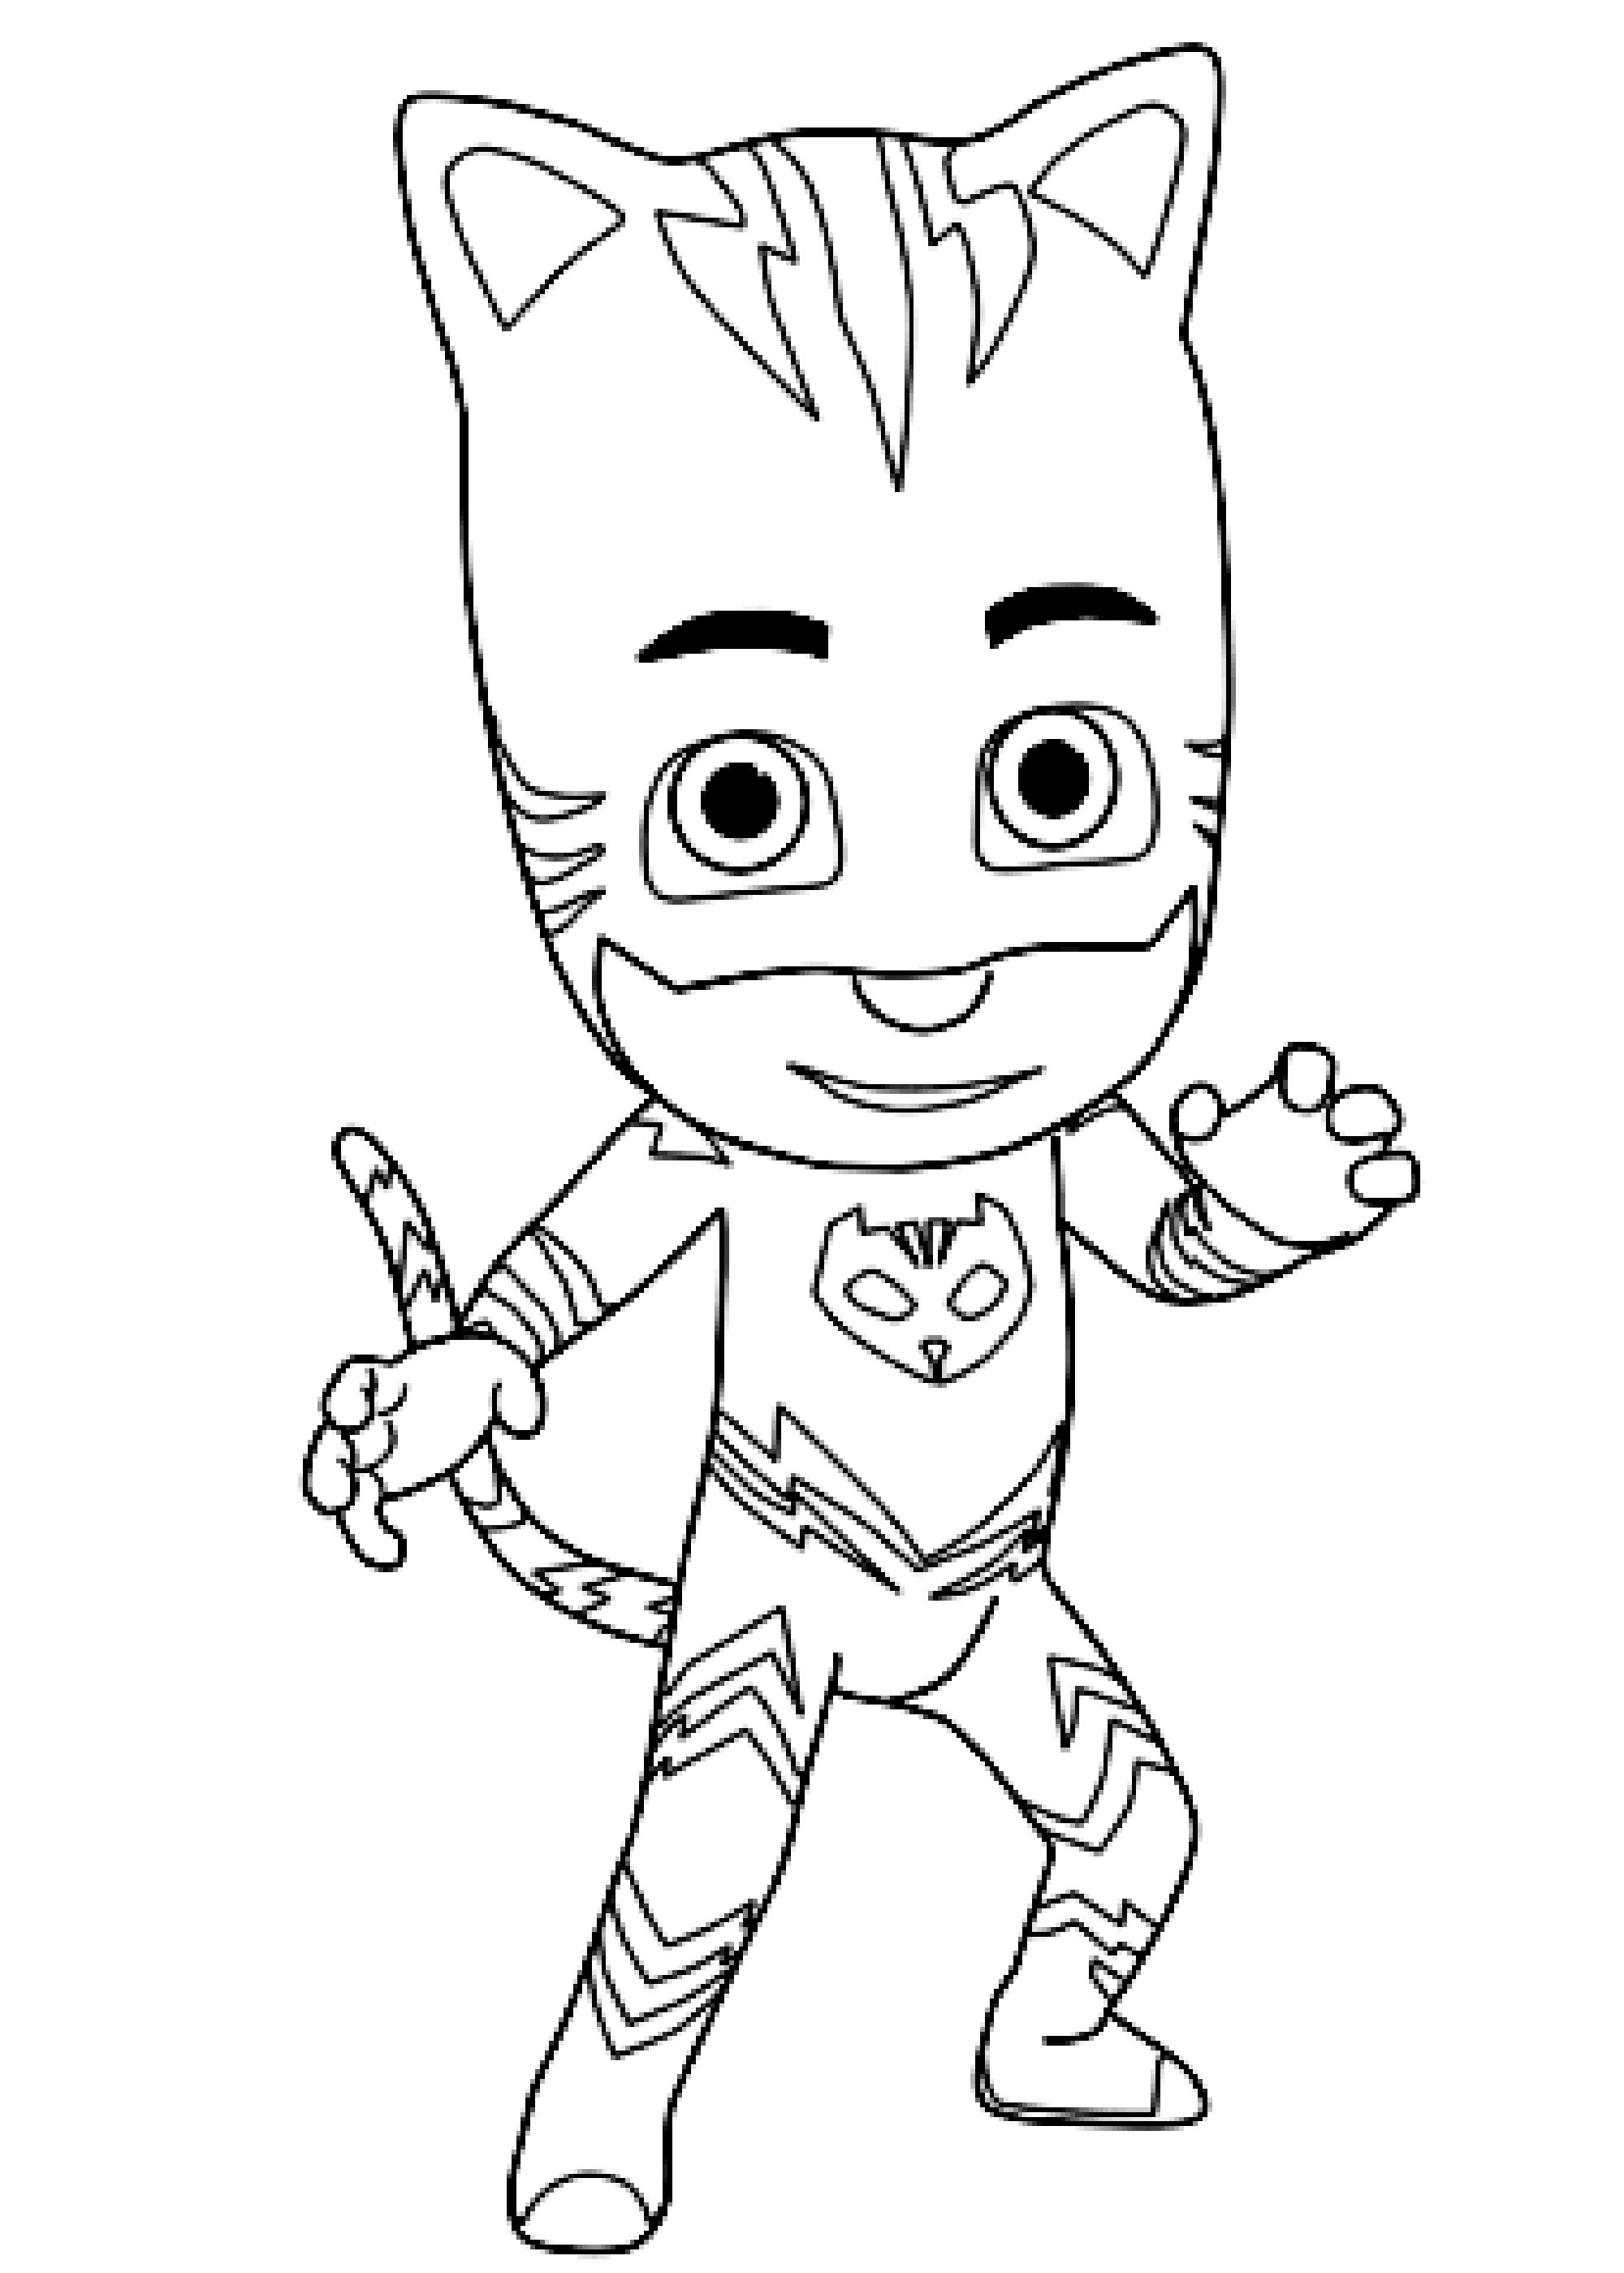 Free And Simple Coloring Pages Of Pj Masks Pj Masks Kids Coloring Pages